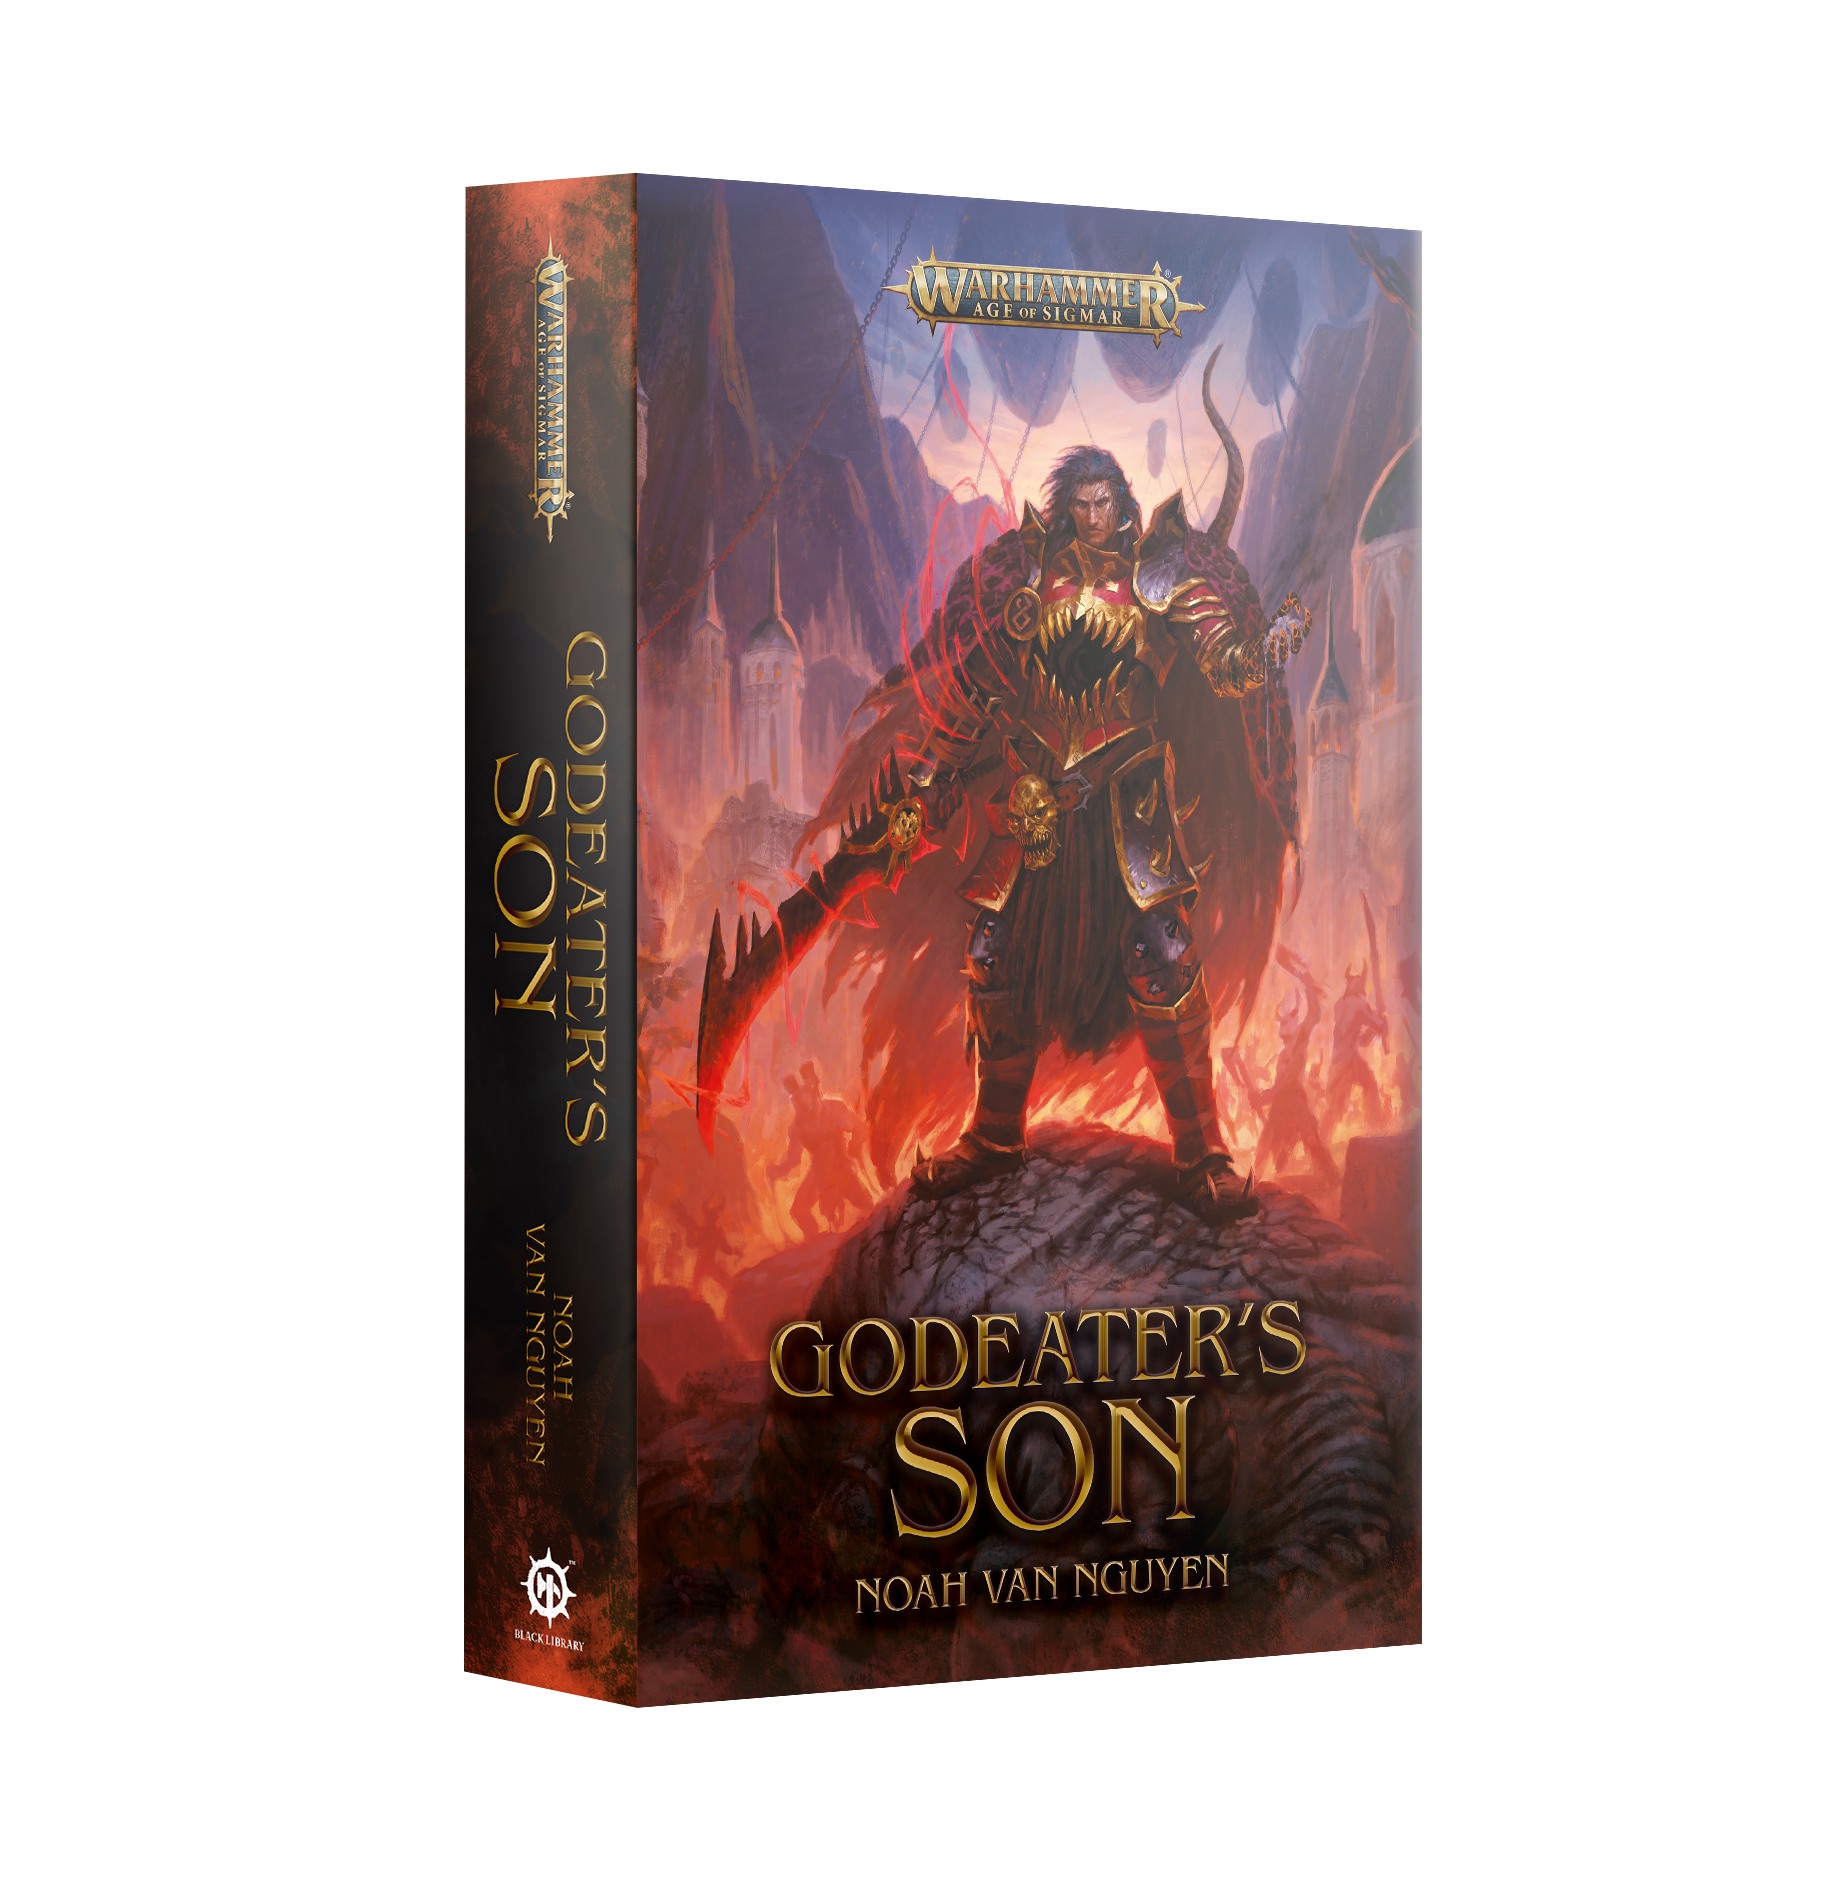 Godeater's Son (paperback)